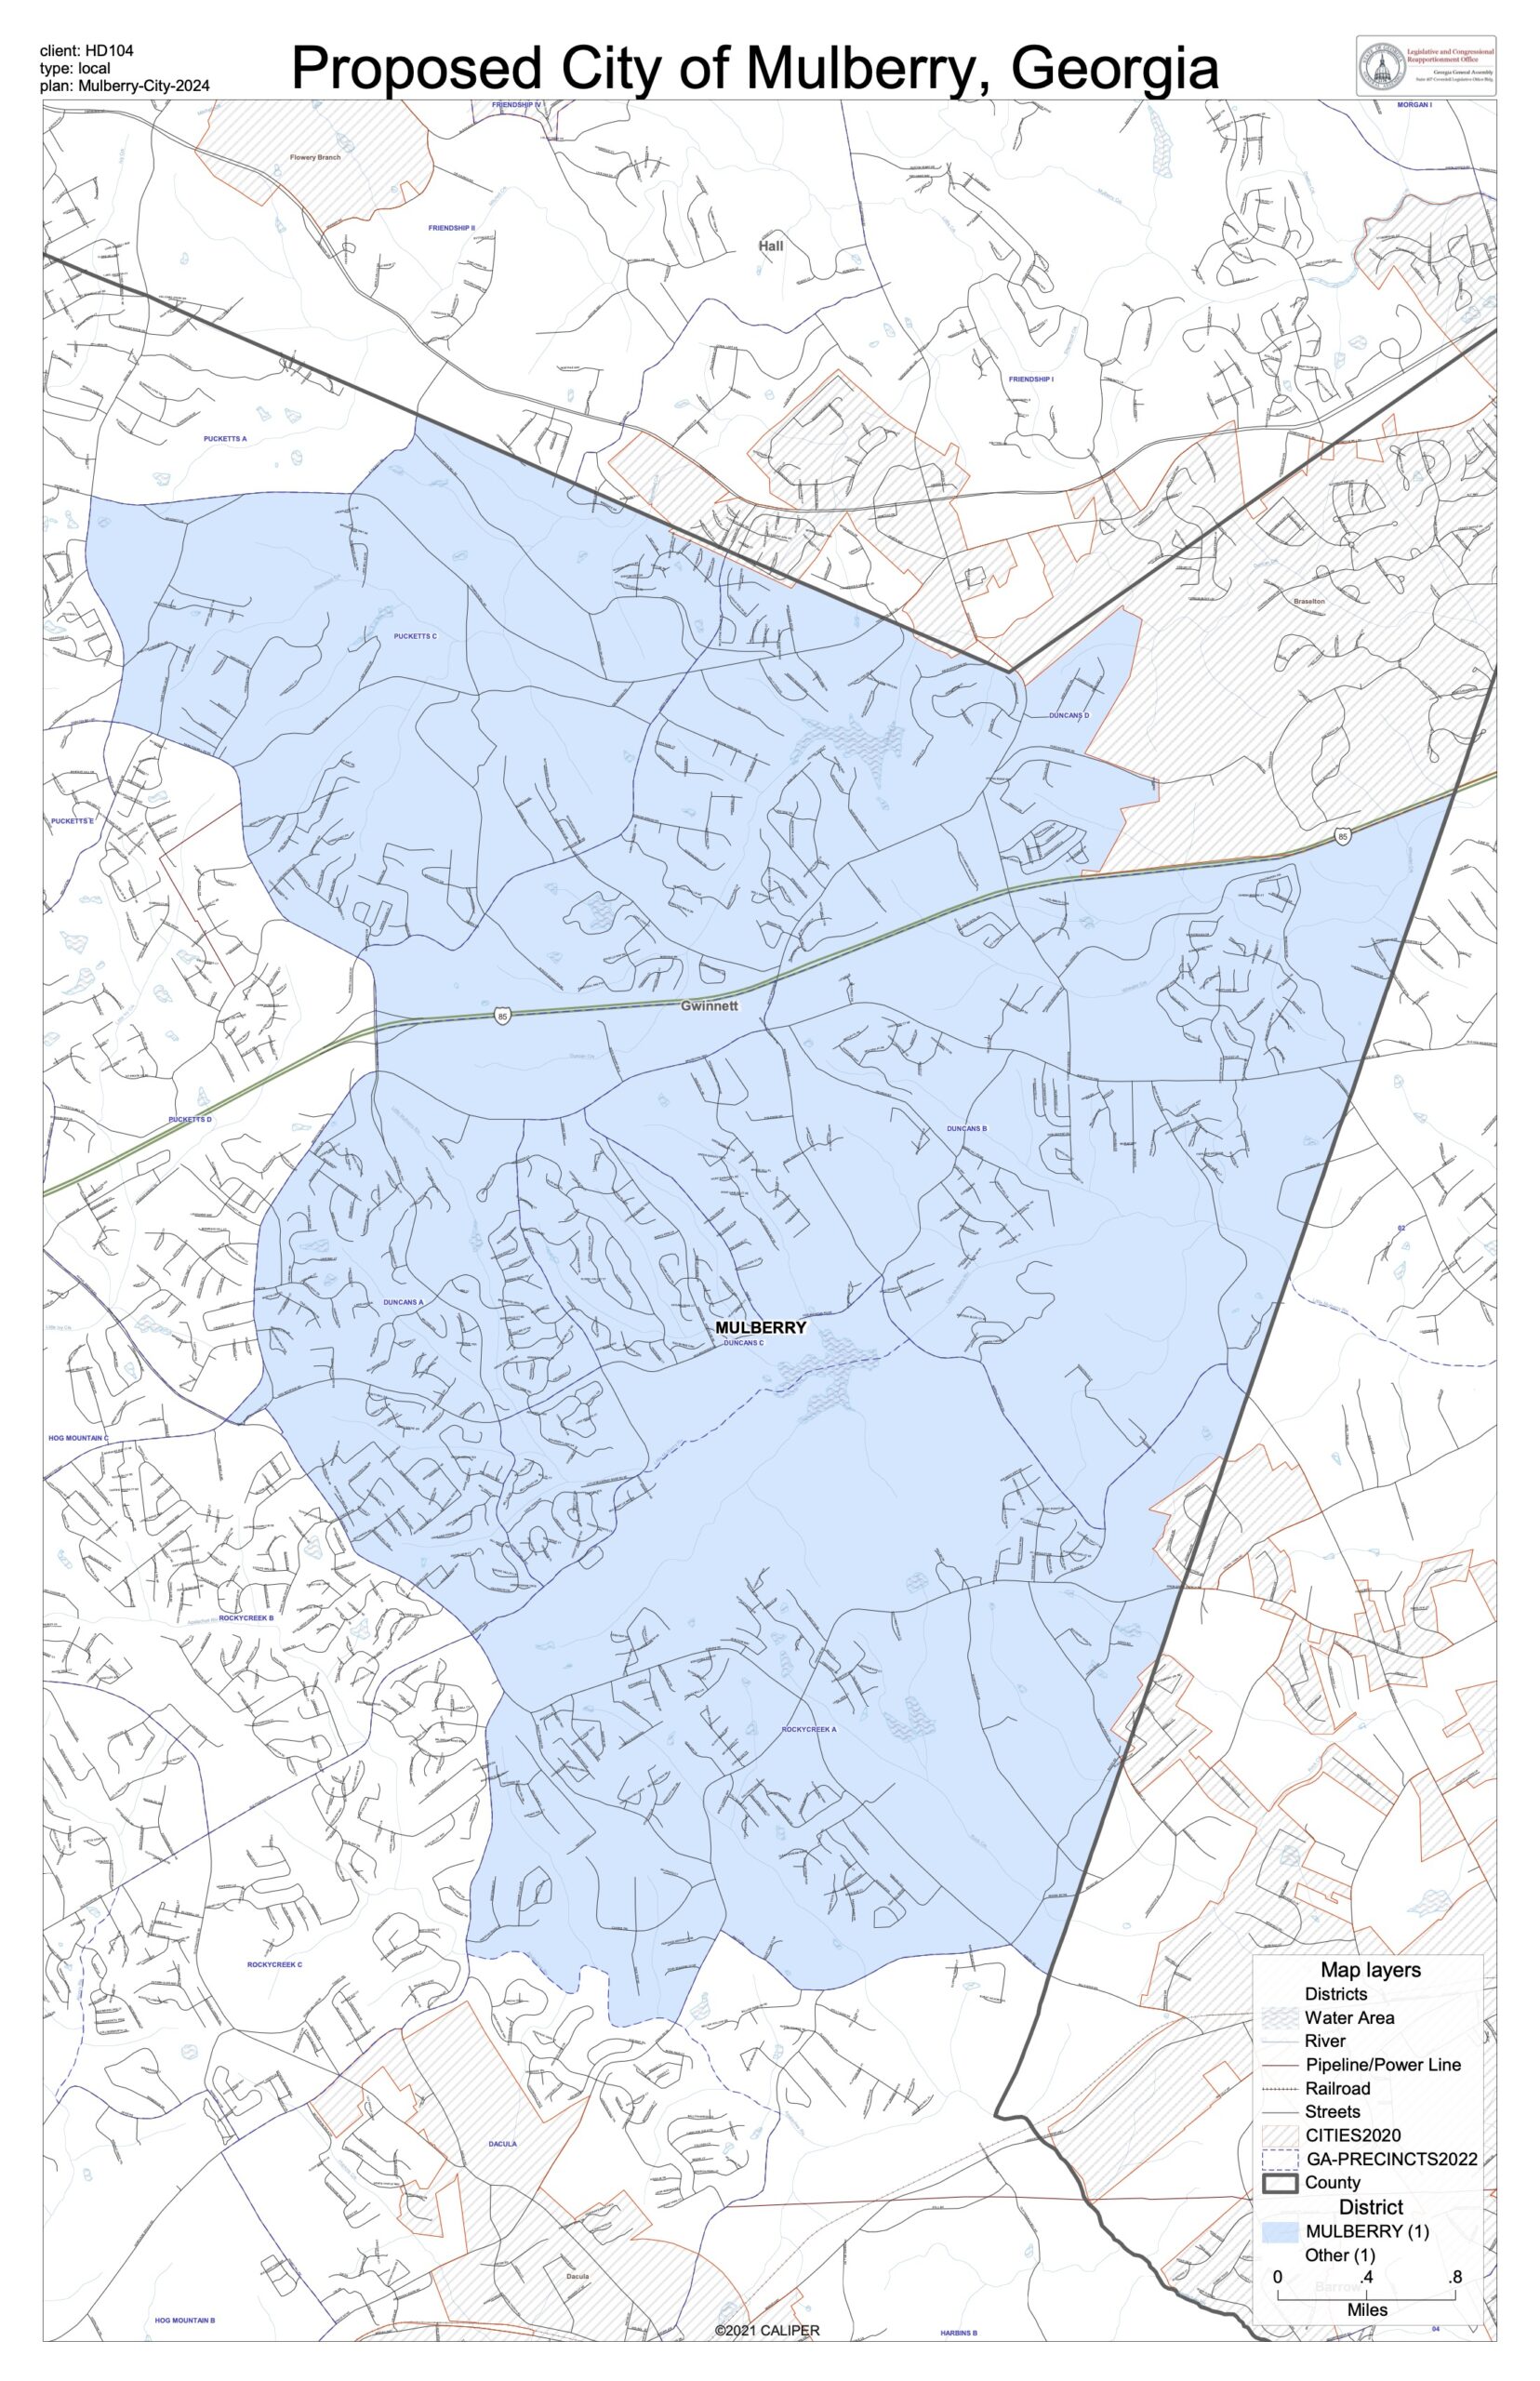 A New City in Gwinnett County? What We Know About Mulberry